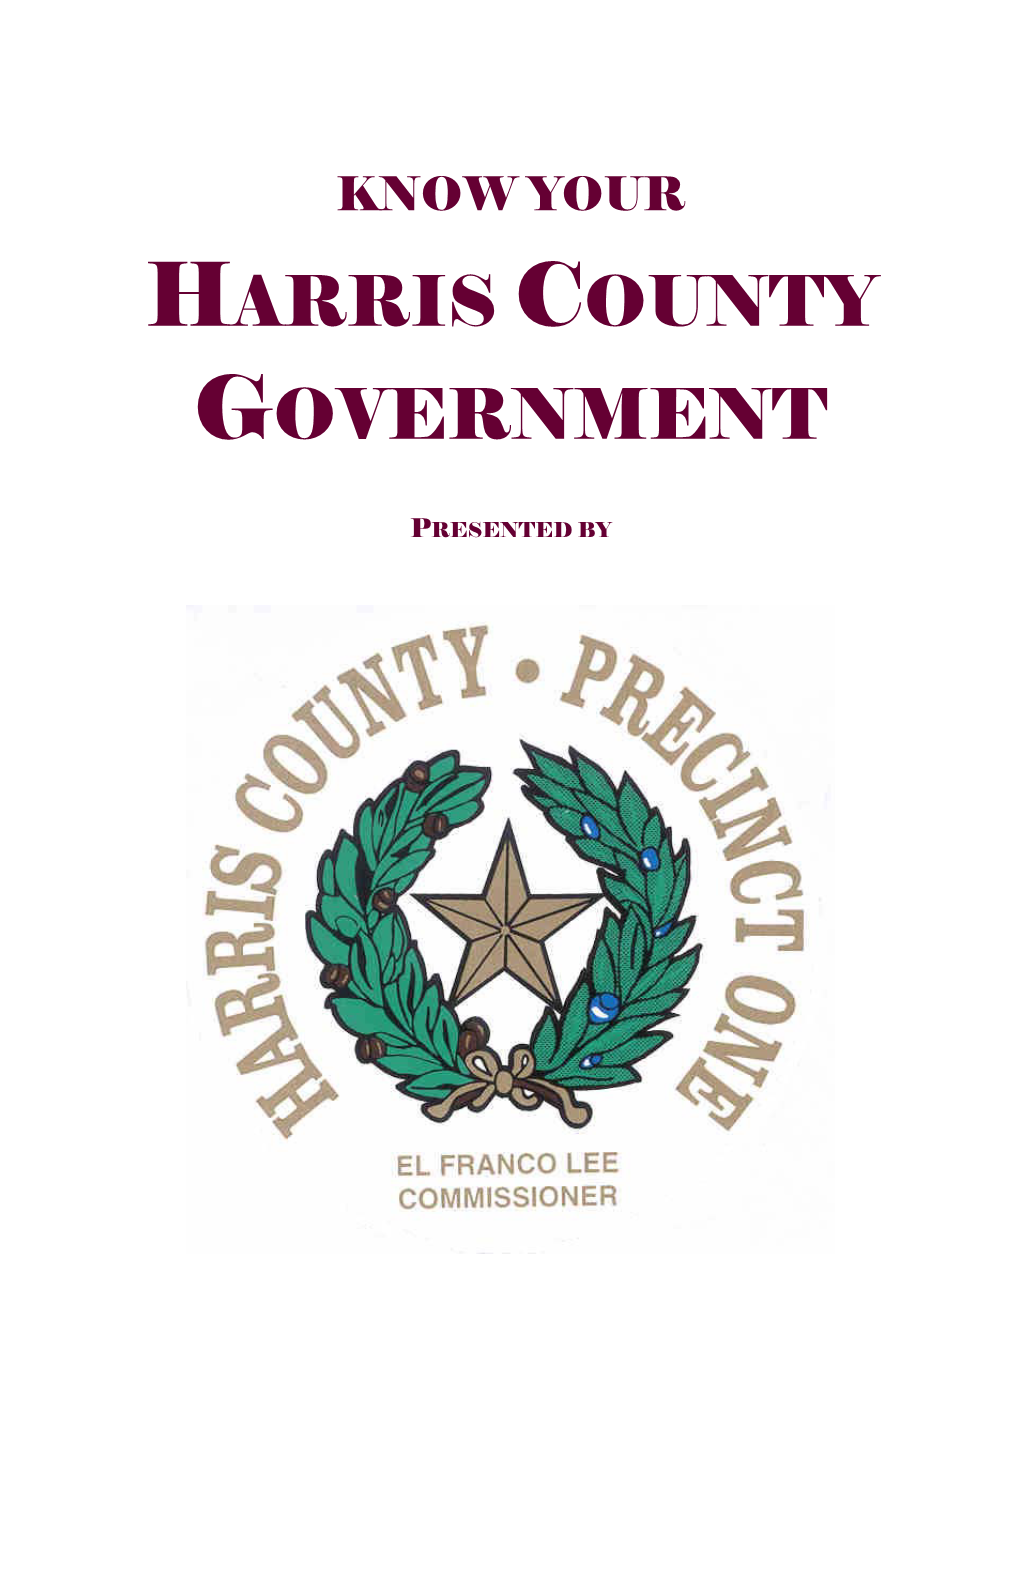 Letter from Harris County